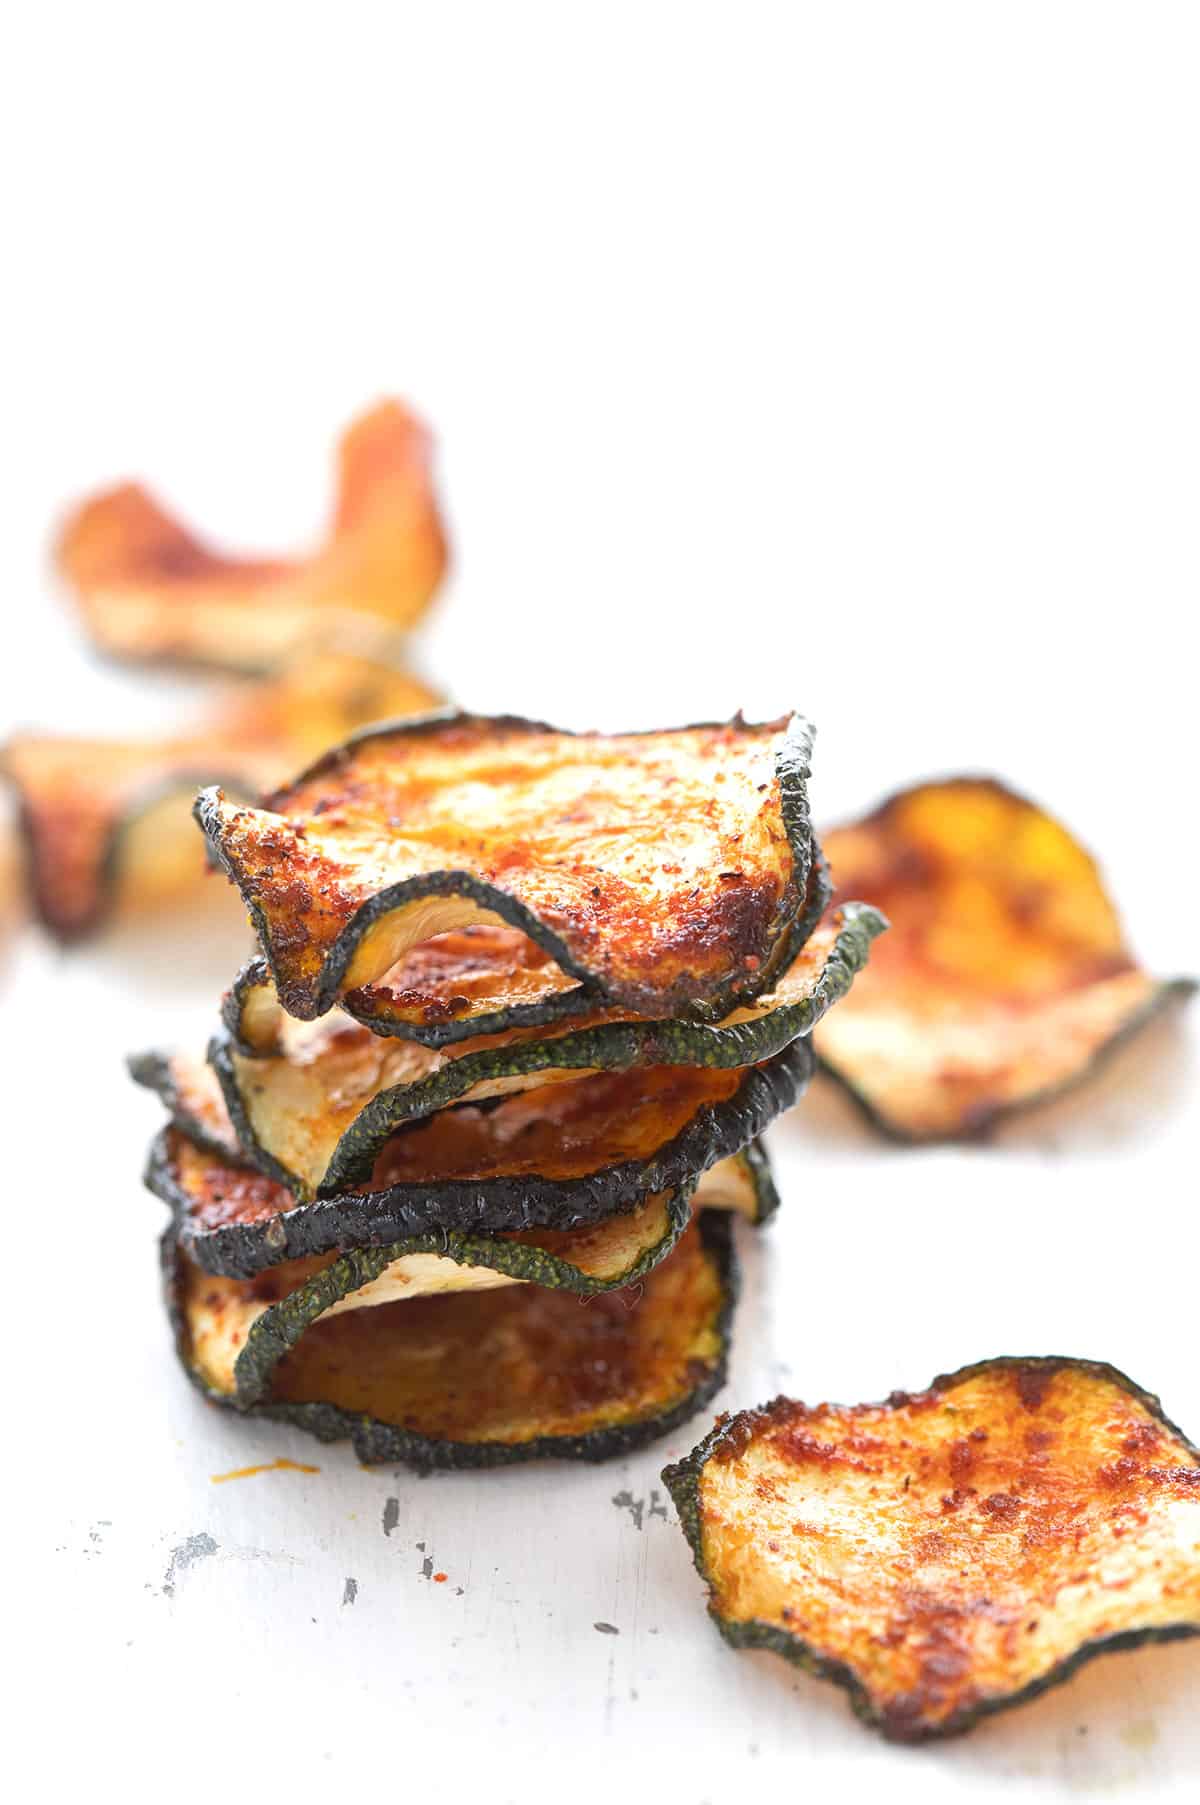 A stack of baked zucchini chips on a white table.